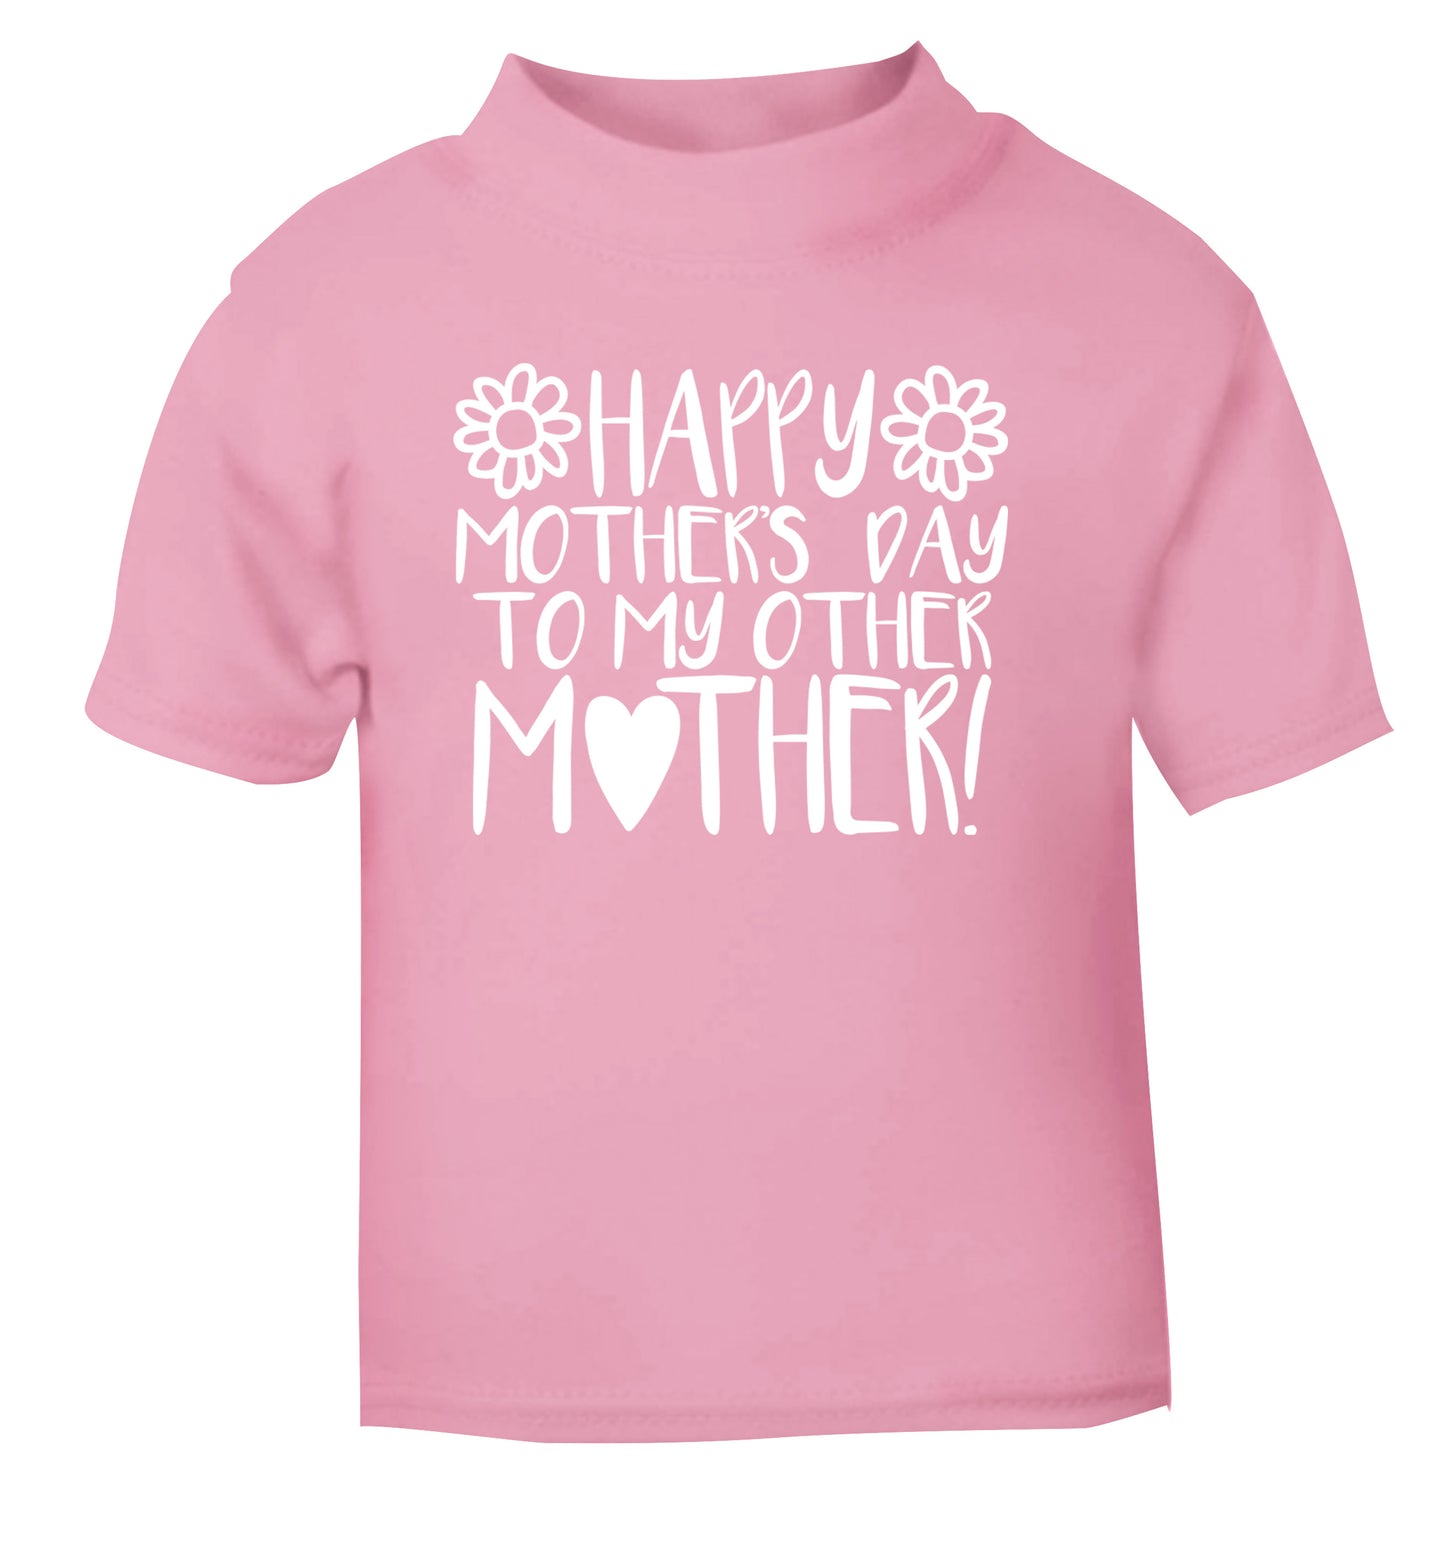 Happy mother's day to my other mother light pink baby toddler Tshirt 2 Years